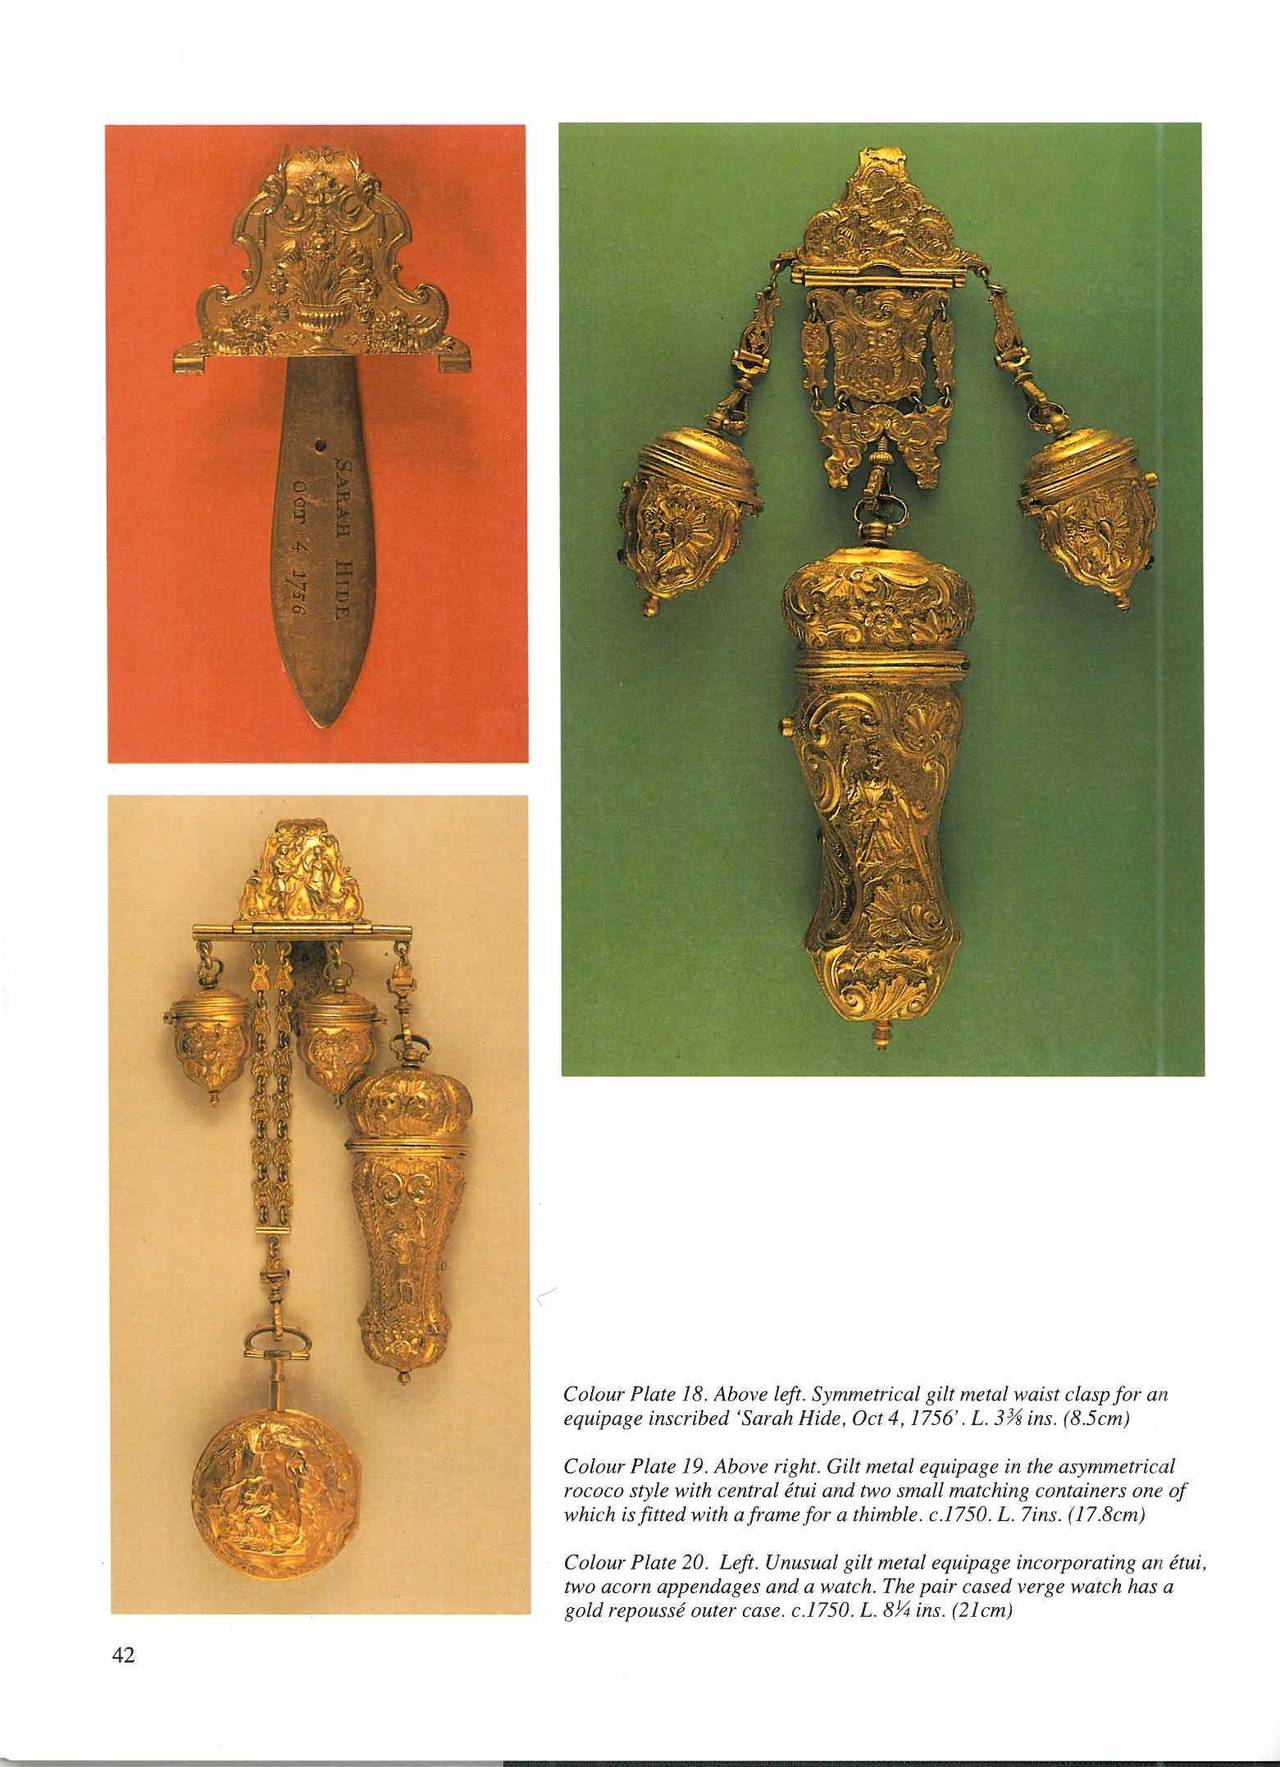 Chatelaines are decorative and useful waist-hung items that are both practical and decorative, which recreate the concept of the medieval chatelaine or lady of the castle wearing her keys at her waist. An extraordinary range is illustrated and